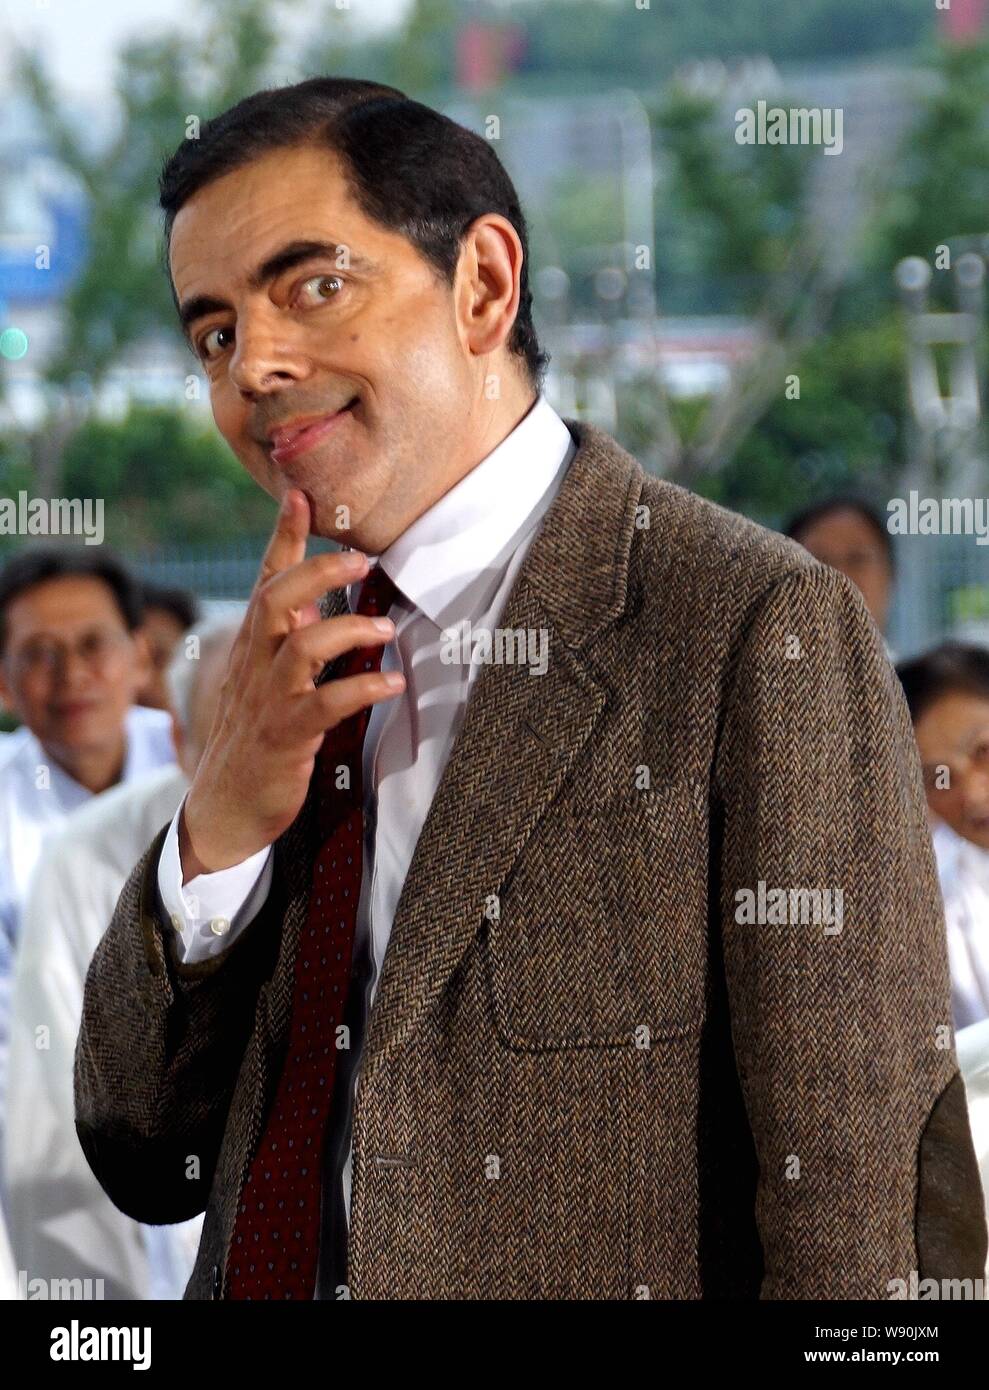 English actor Rowan Atkinson plays Mr. Bean during a filming session for a TV commercial at the Mercedes-Benz Arena in Shanghai, China, 20 August 2014 Stock Photo